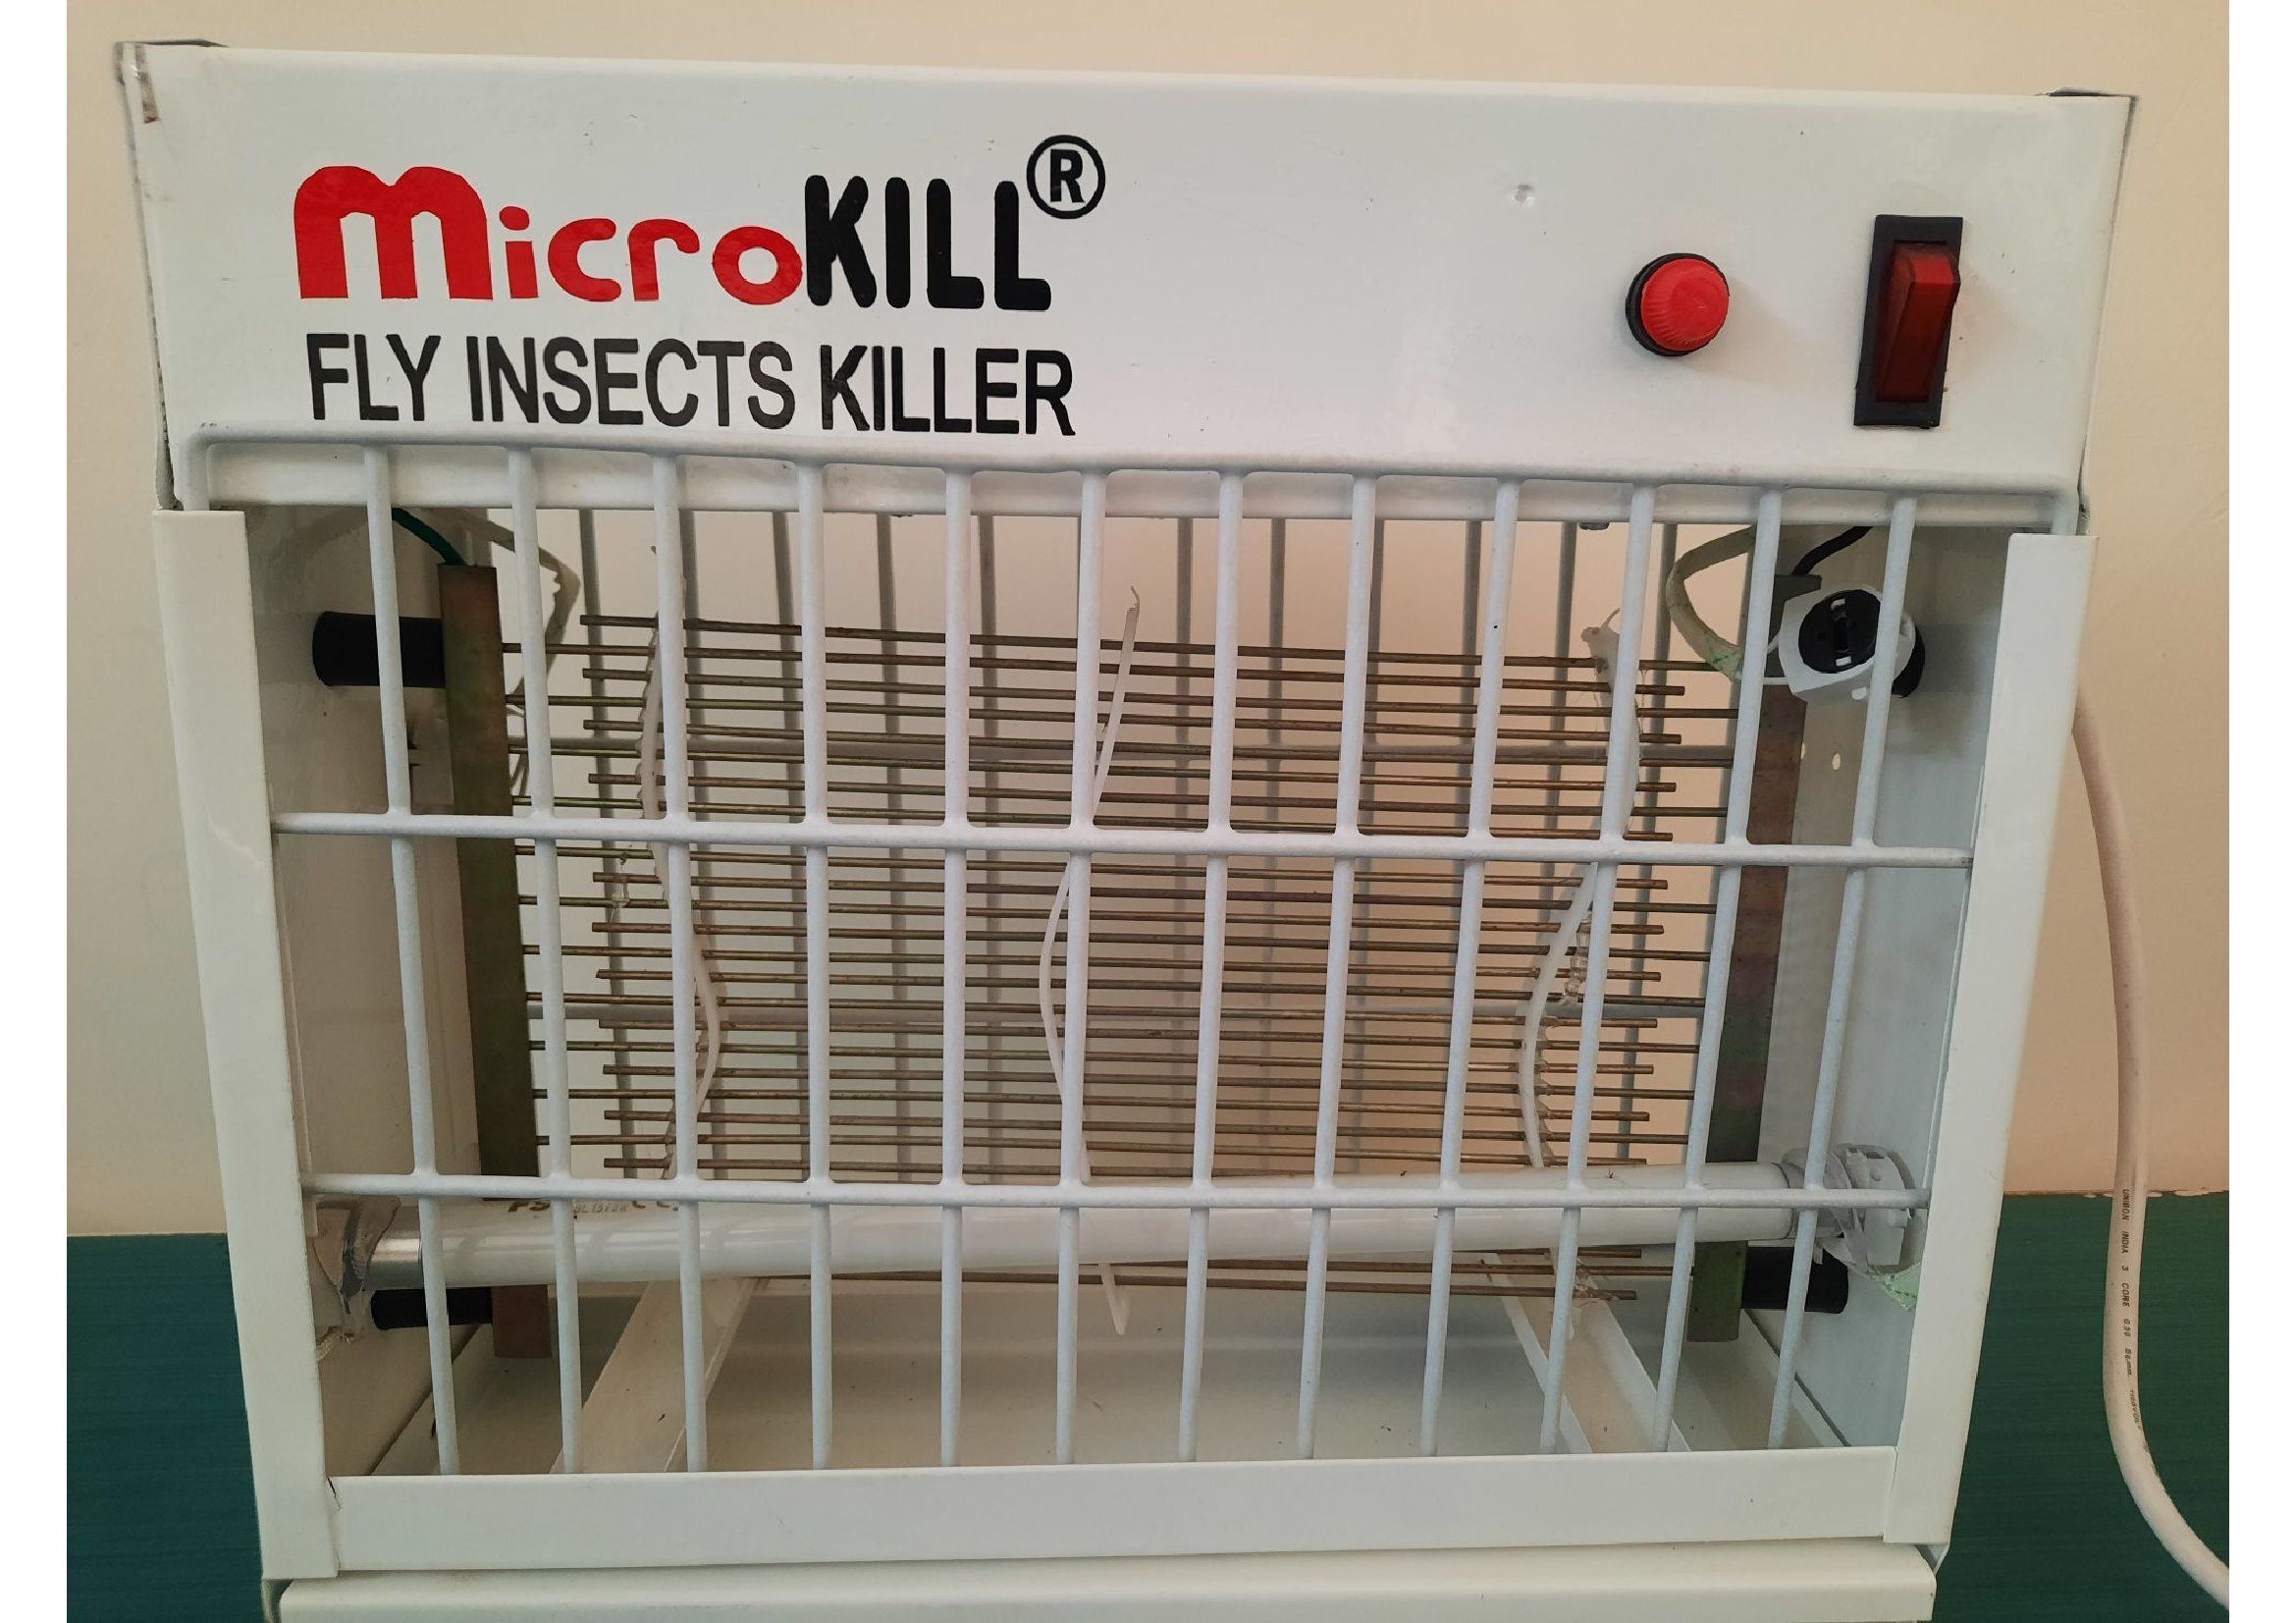 1 Feet Insect Killer Machine